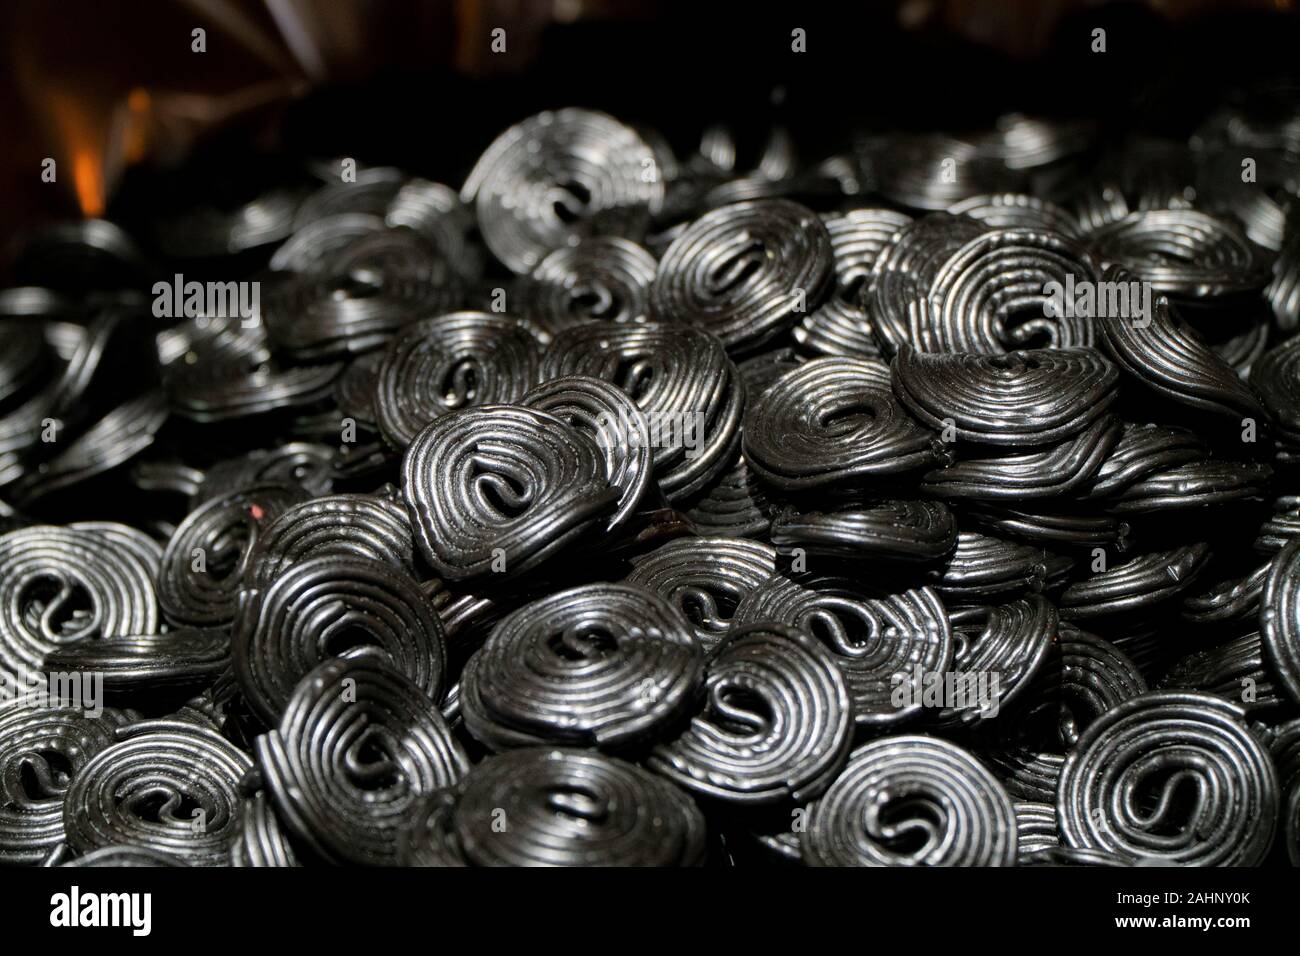 Licorice wheels candies. Candy flavored licorice. Top View Stock Photo